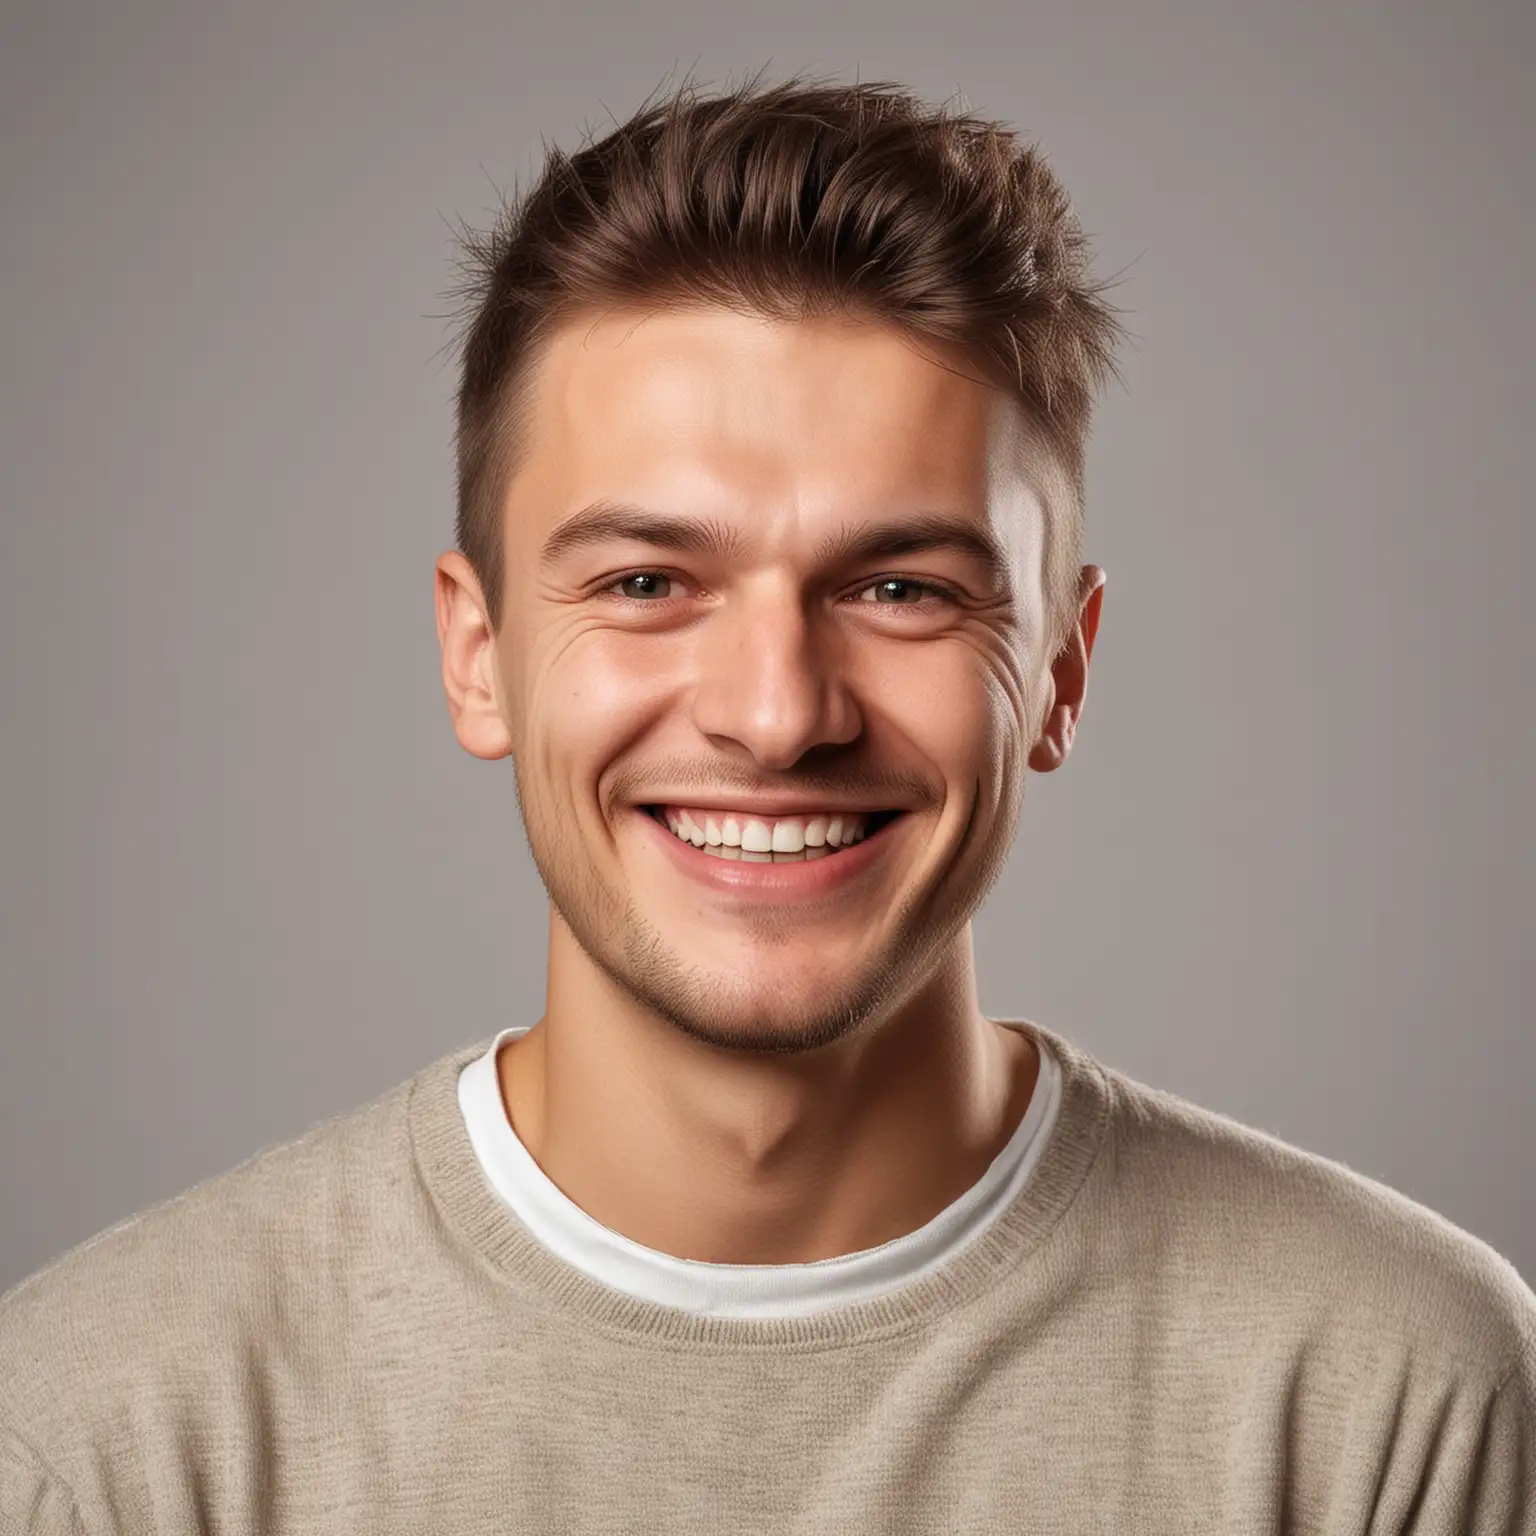 guy of Slavic nationality smiling to his fullest, plain background, real photo